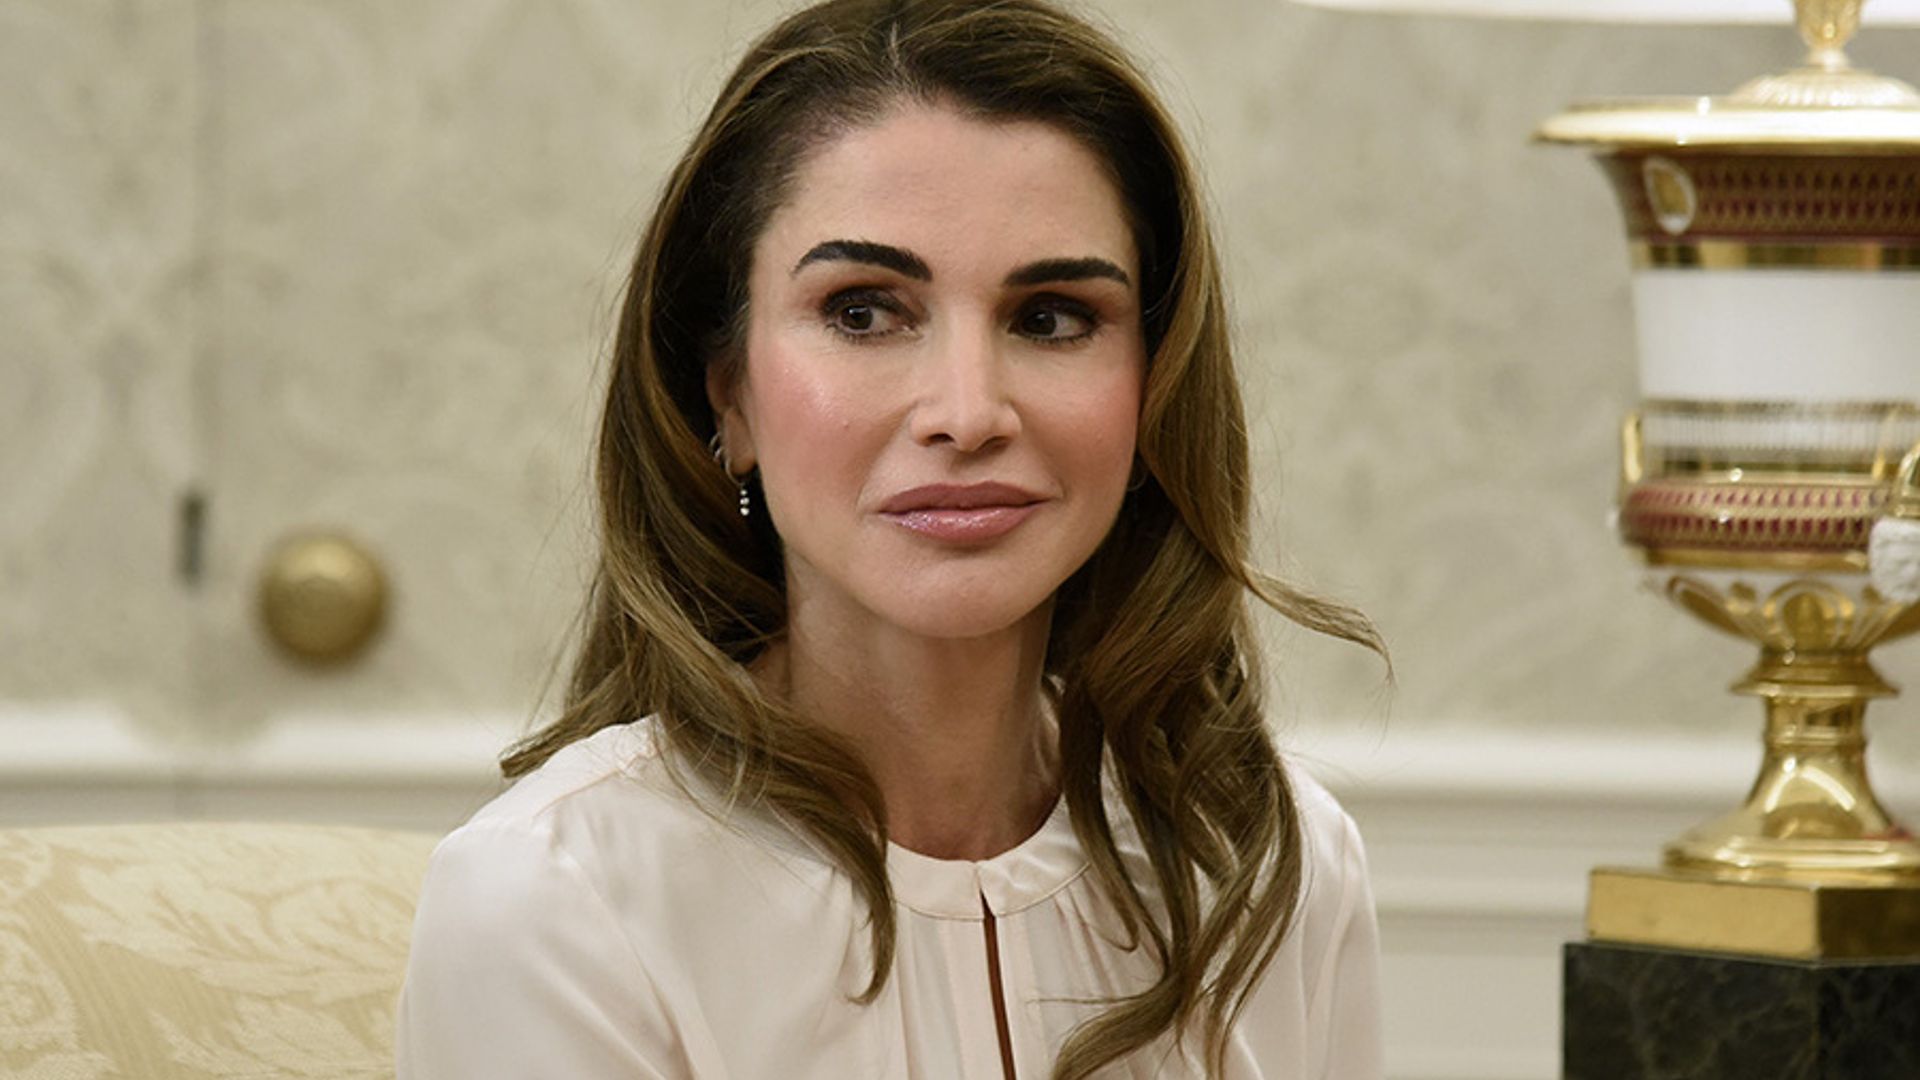 Queen Rania celebrates her birthday with portraits and sweet messages from her family